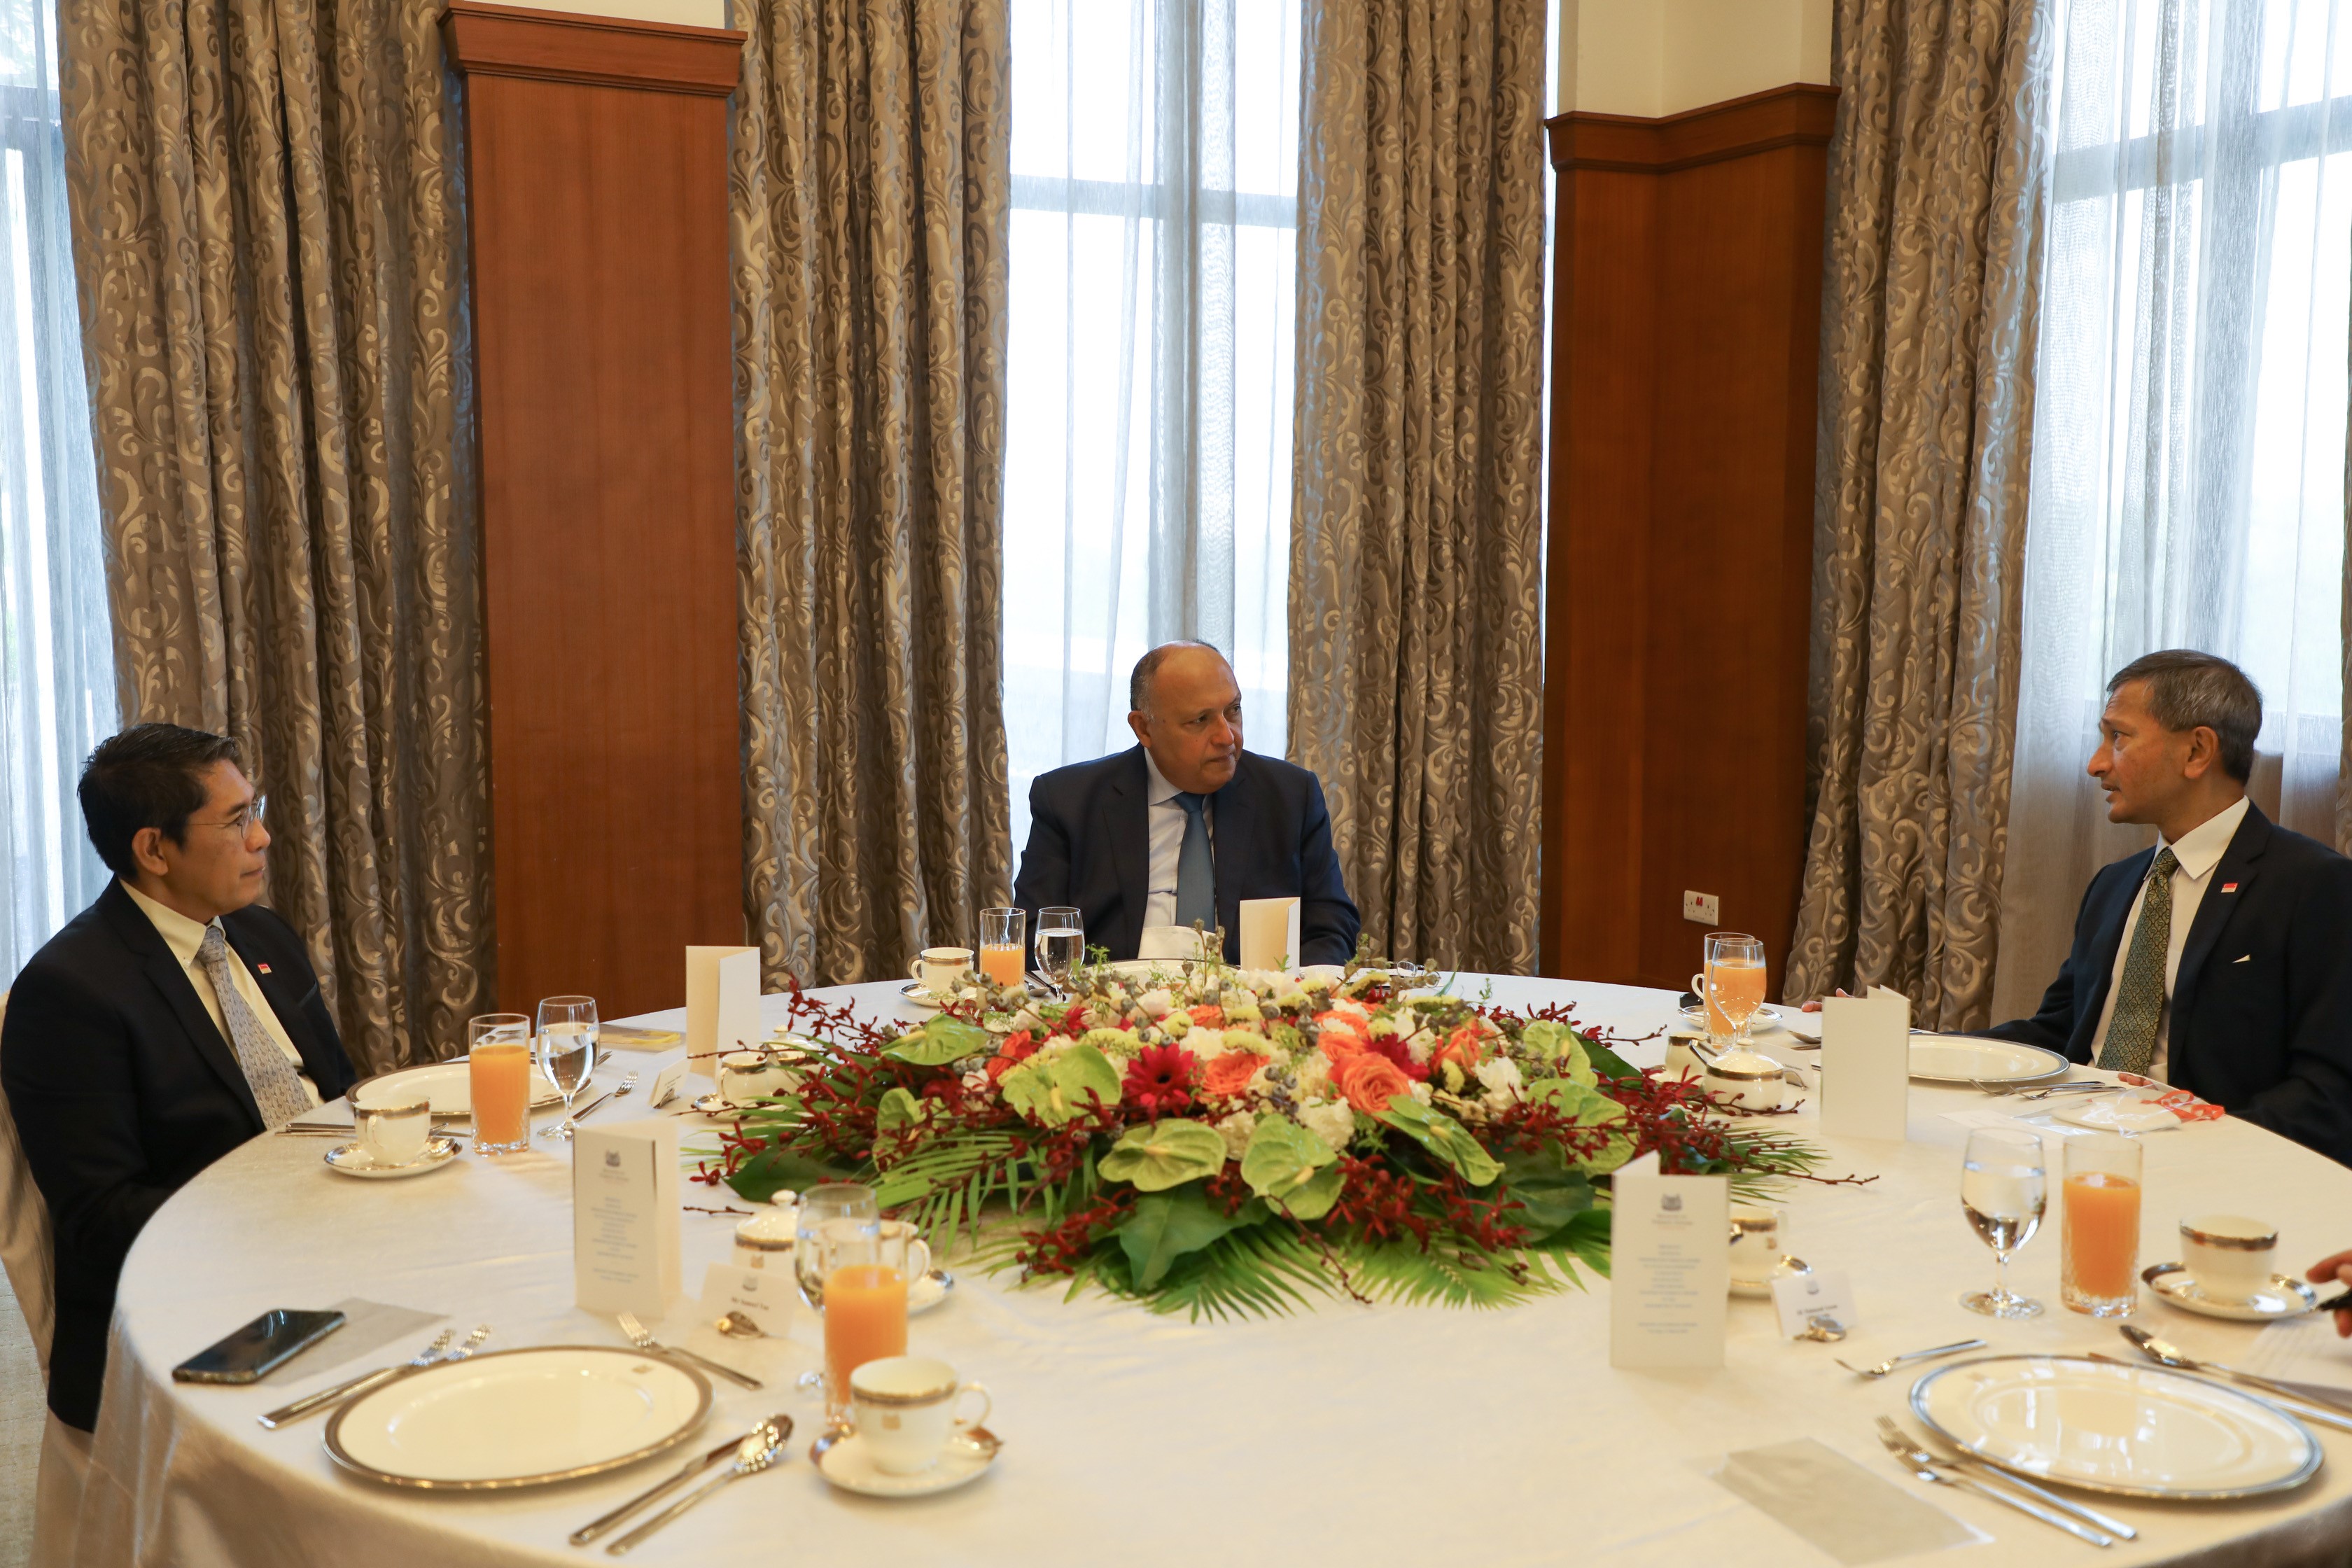 FM Shoukry Breakfast with Min and 2Min